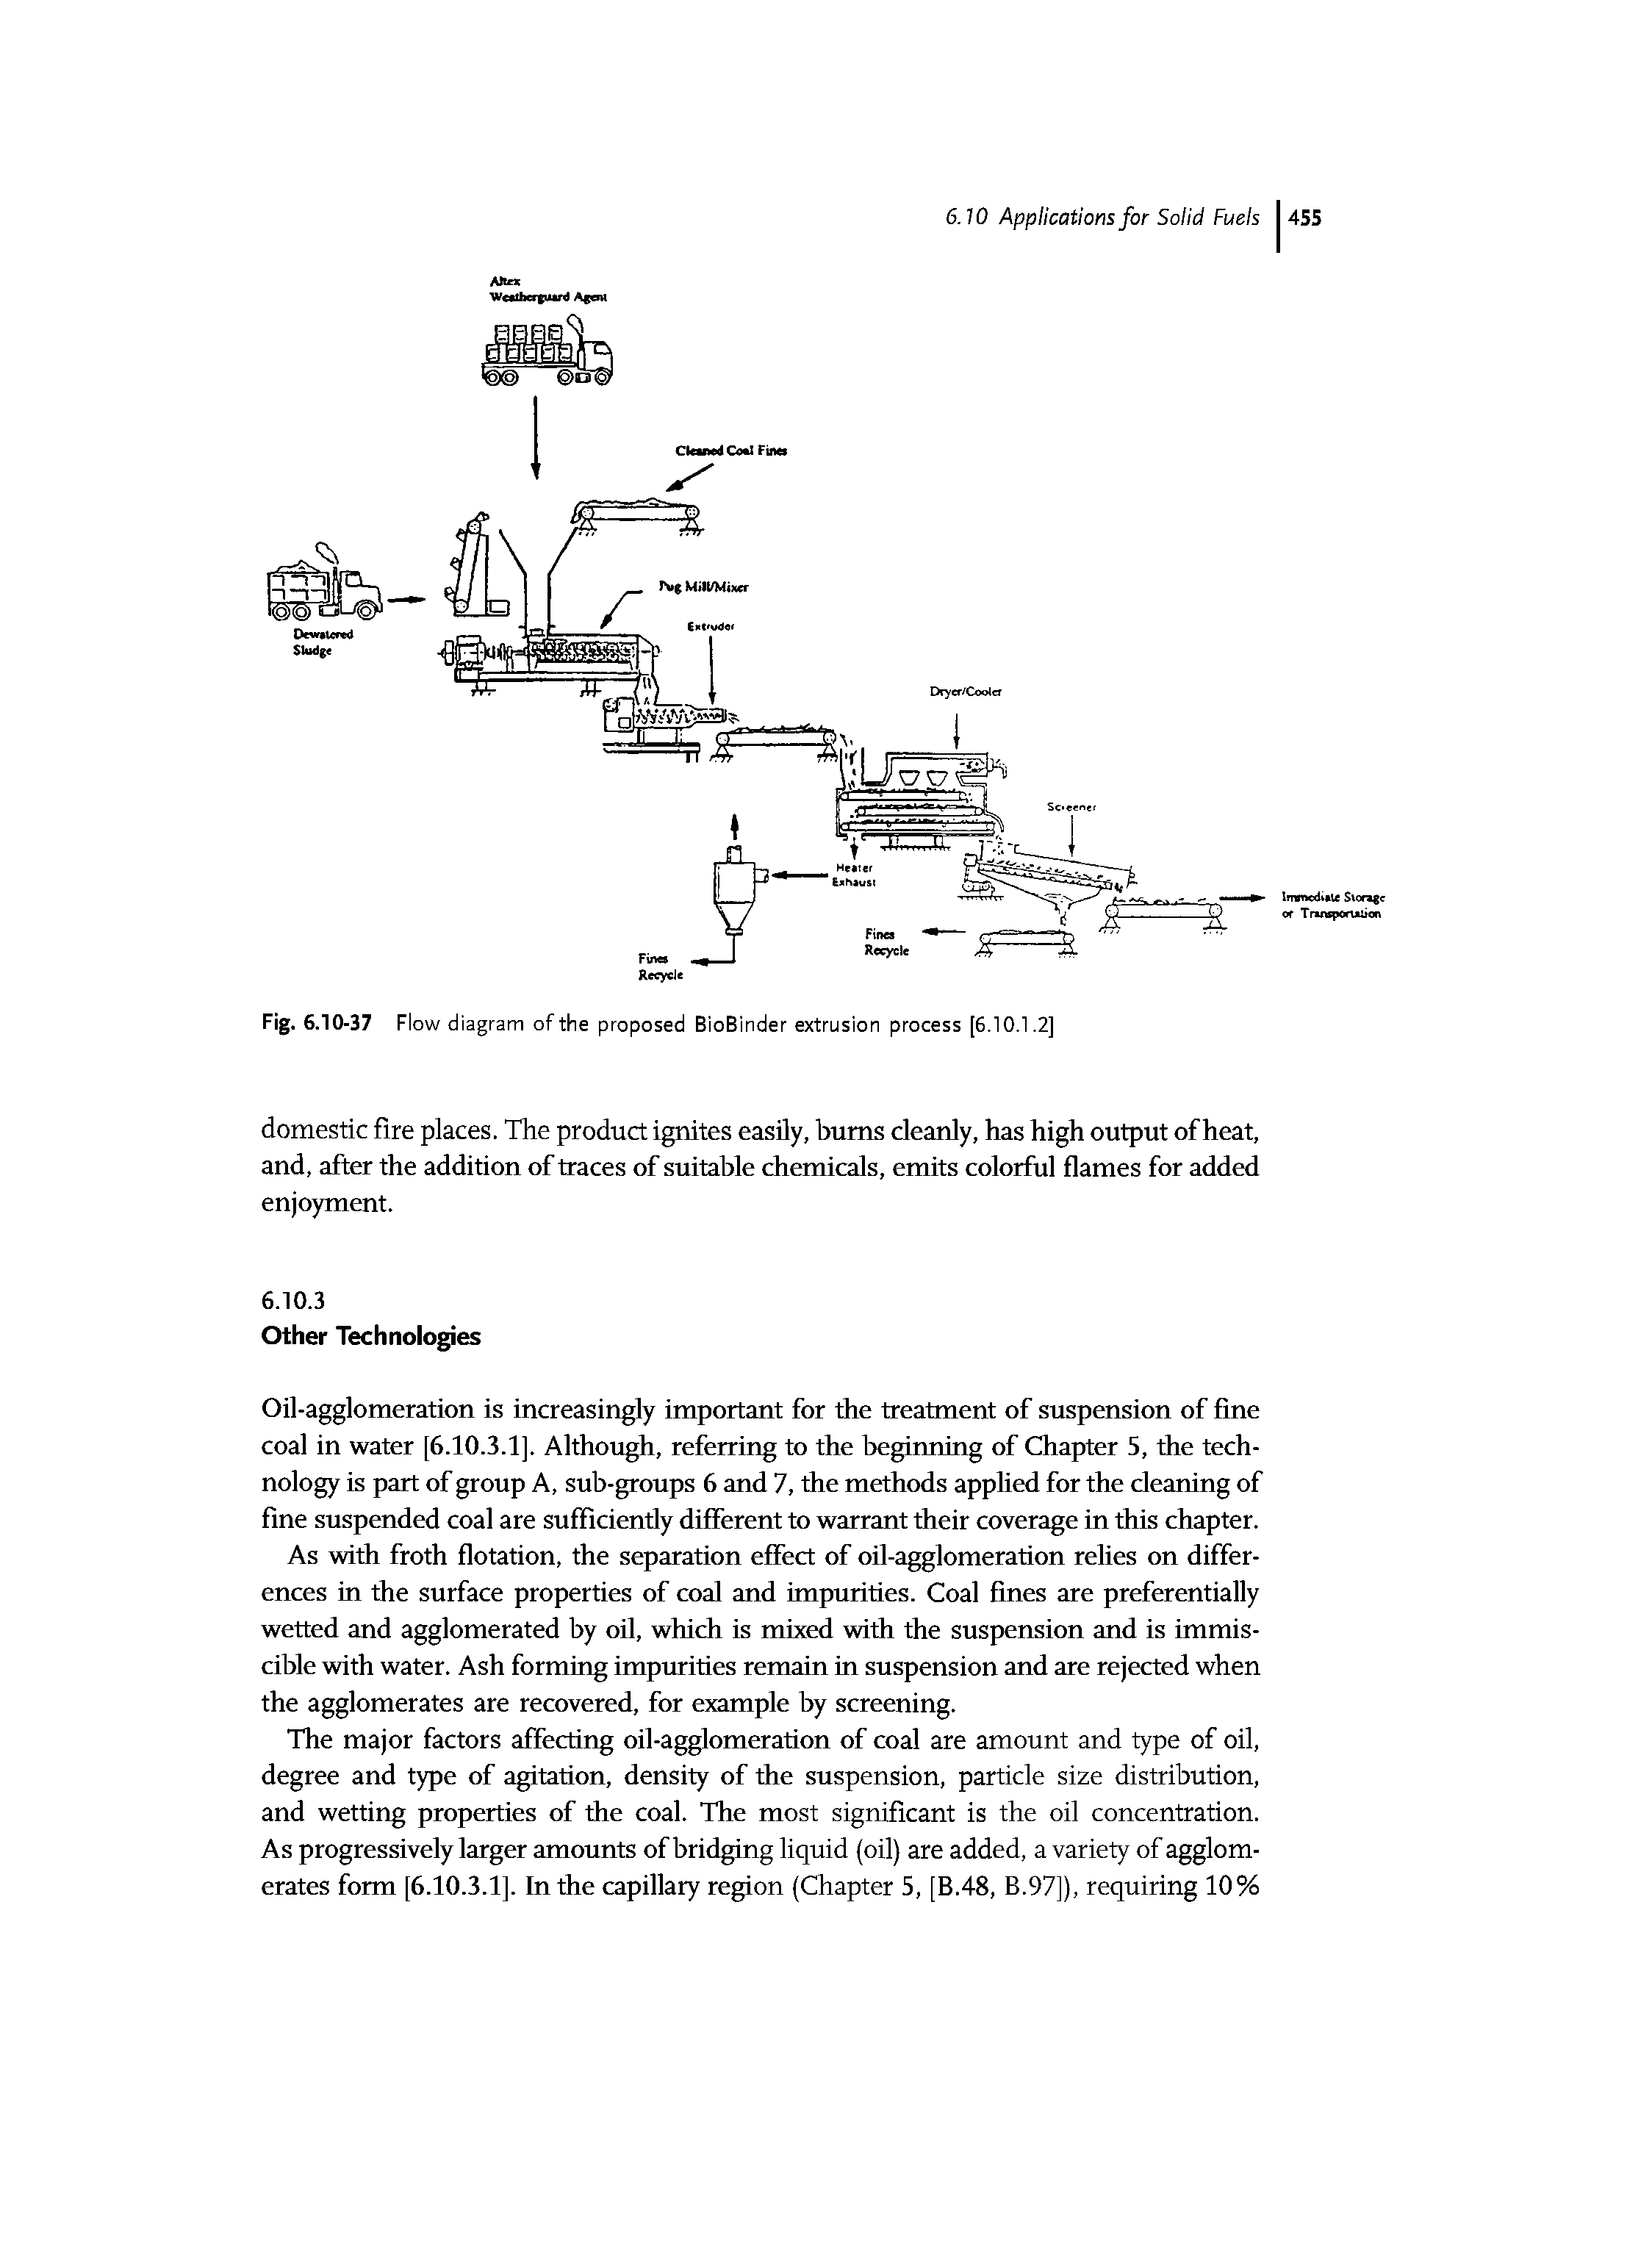 Fig. 6.10-37 Flow diagram of the proposed BioBinder extrusion process [6.10.1.2]...